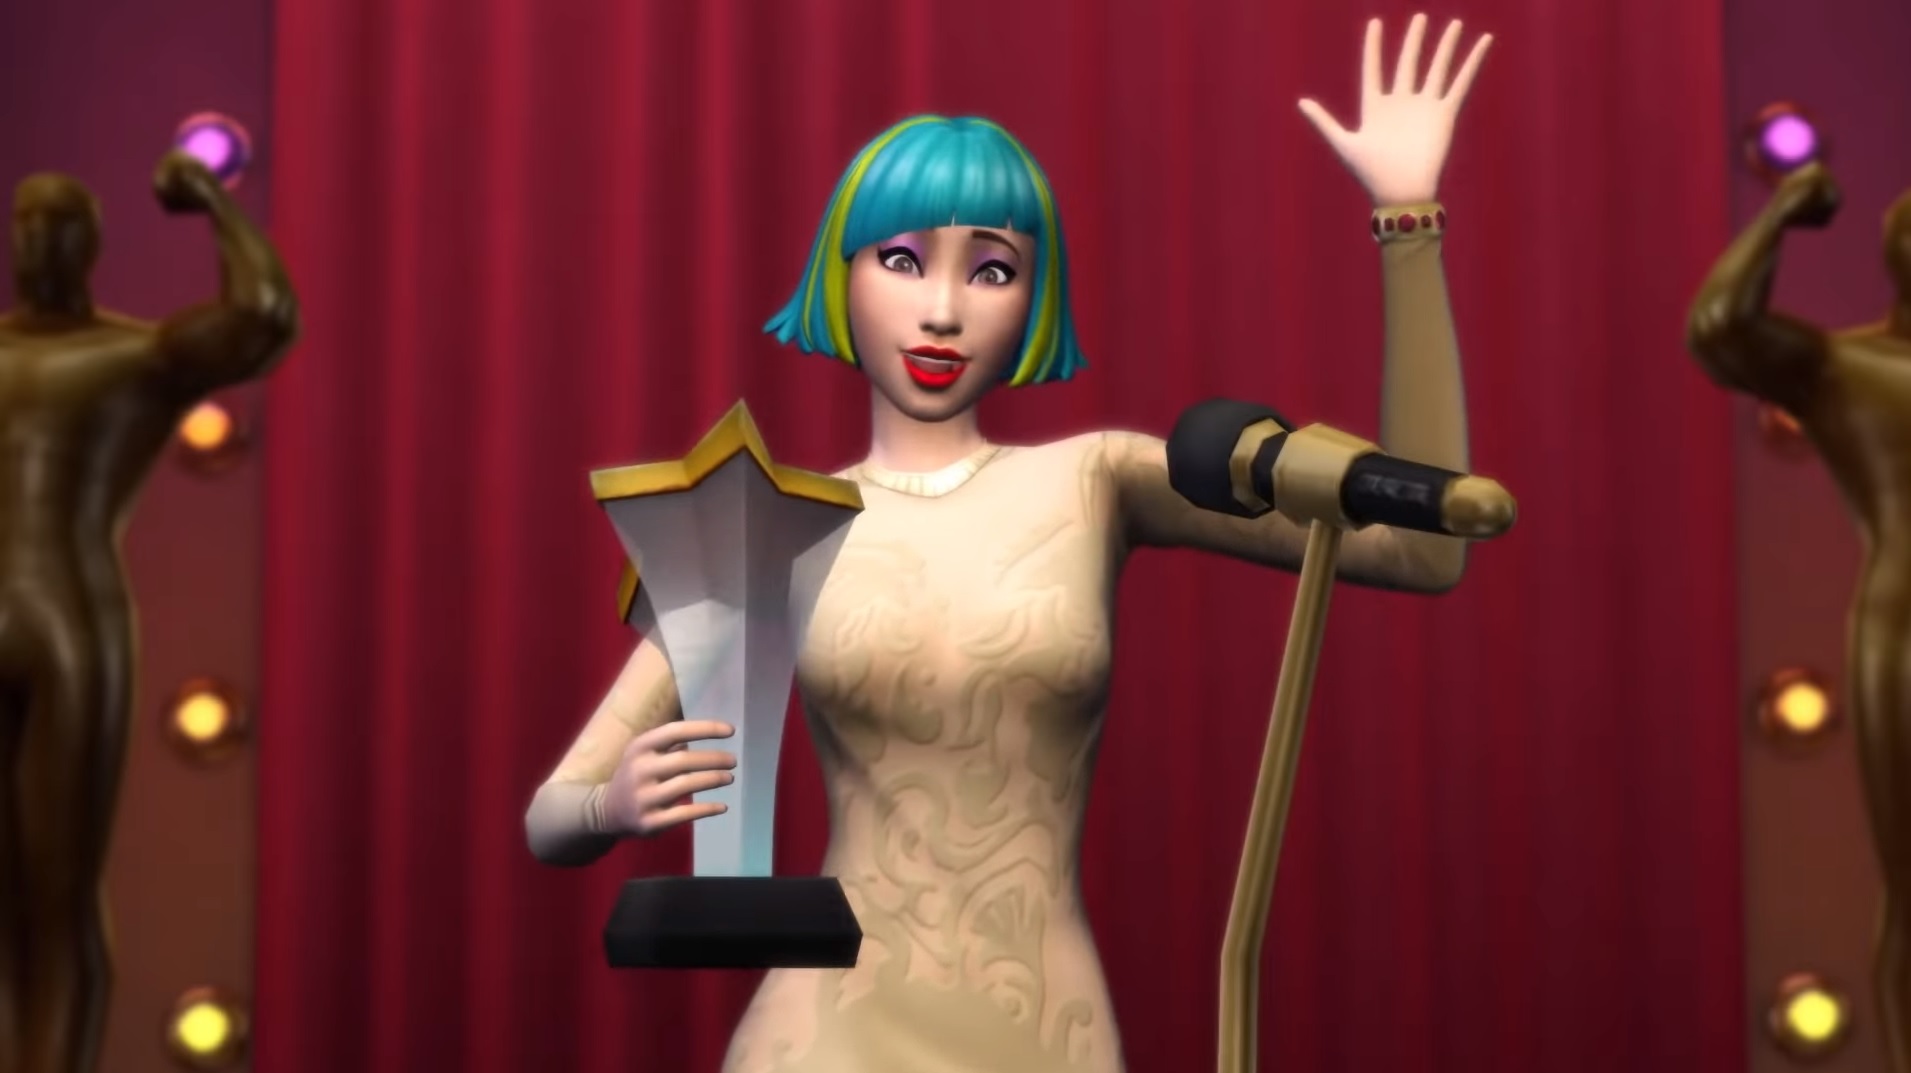 sims 4 cheats - get famous cheats - Sim accepts award on stage